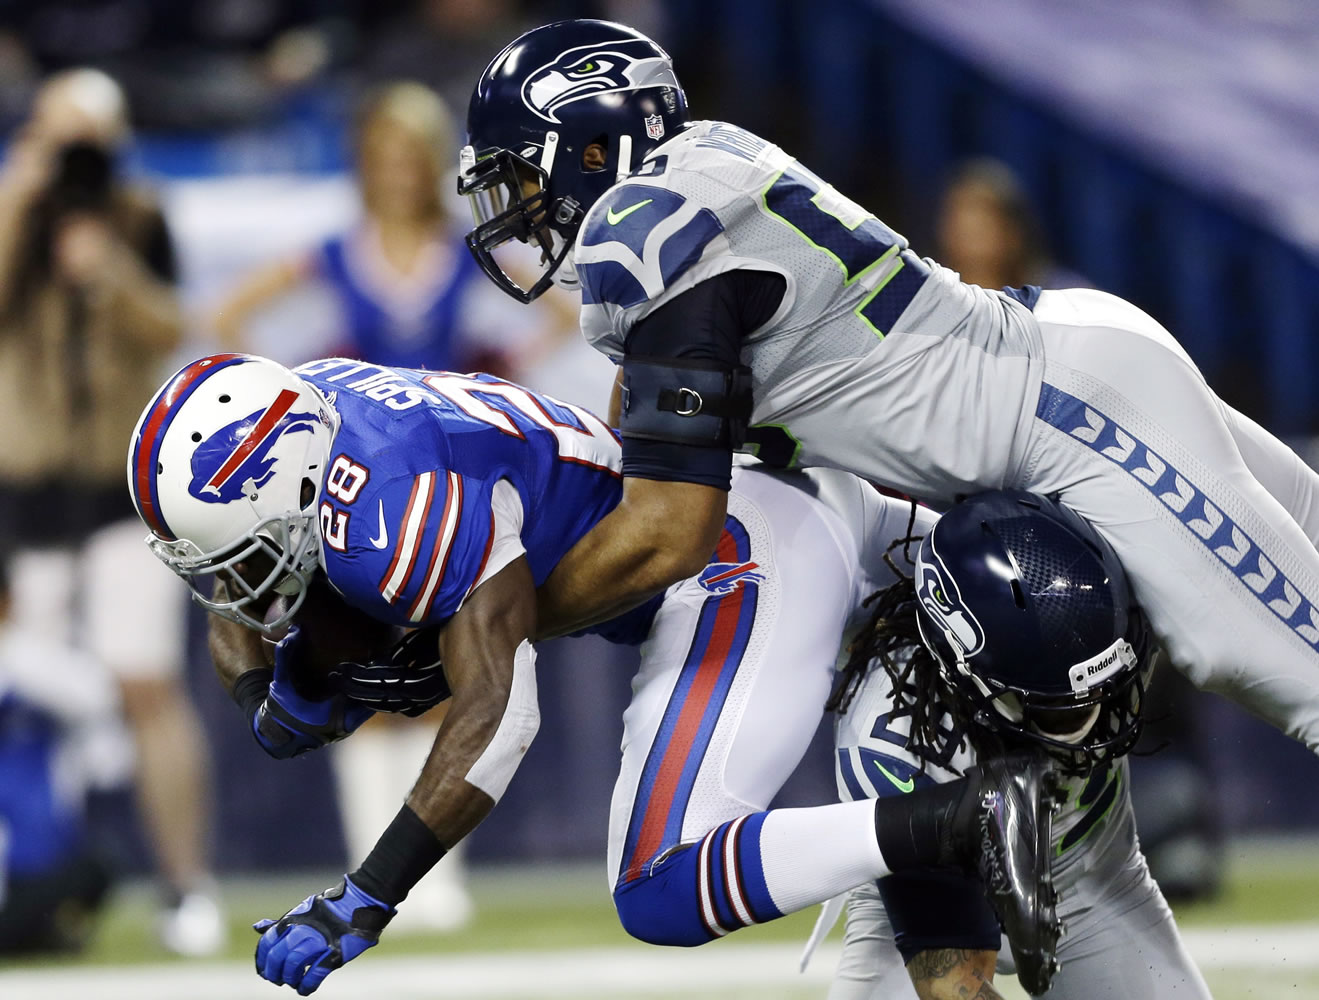 Buffalo Bills running back C.J. Spiller (28) is tackled by Seattle Seahawks free safety Earl Thomas (29) and outside linebacker K.J.